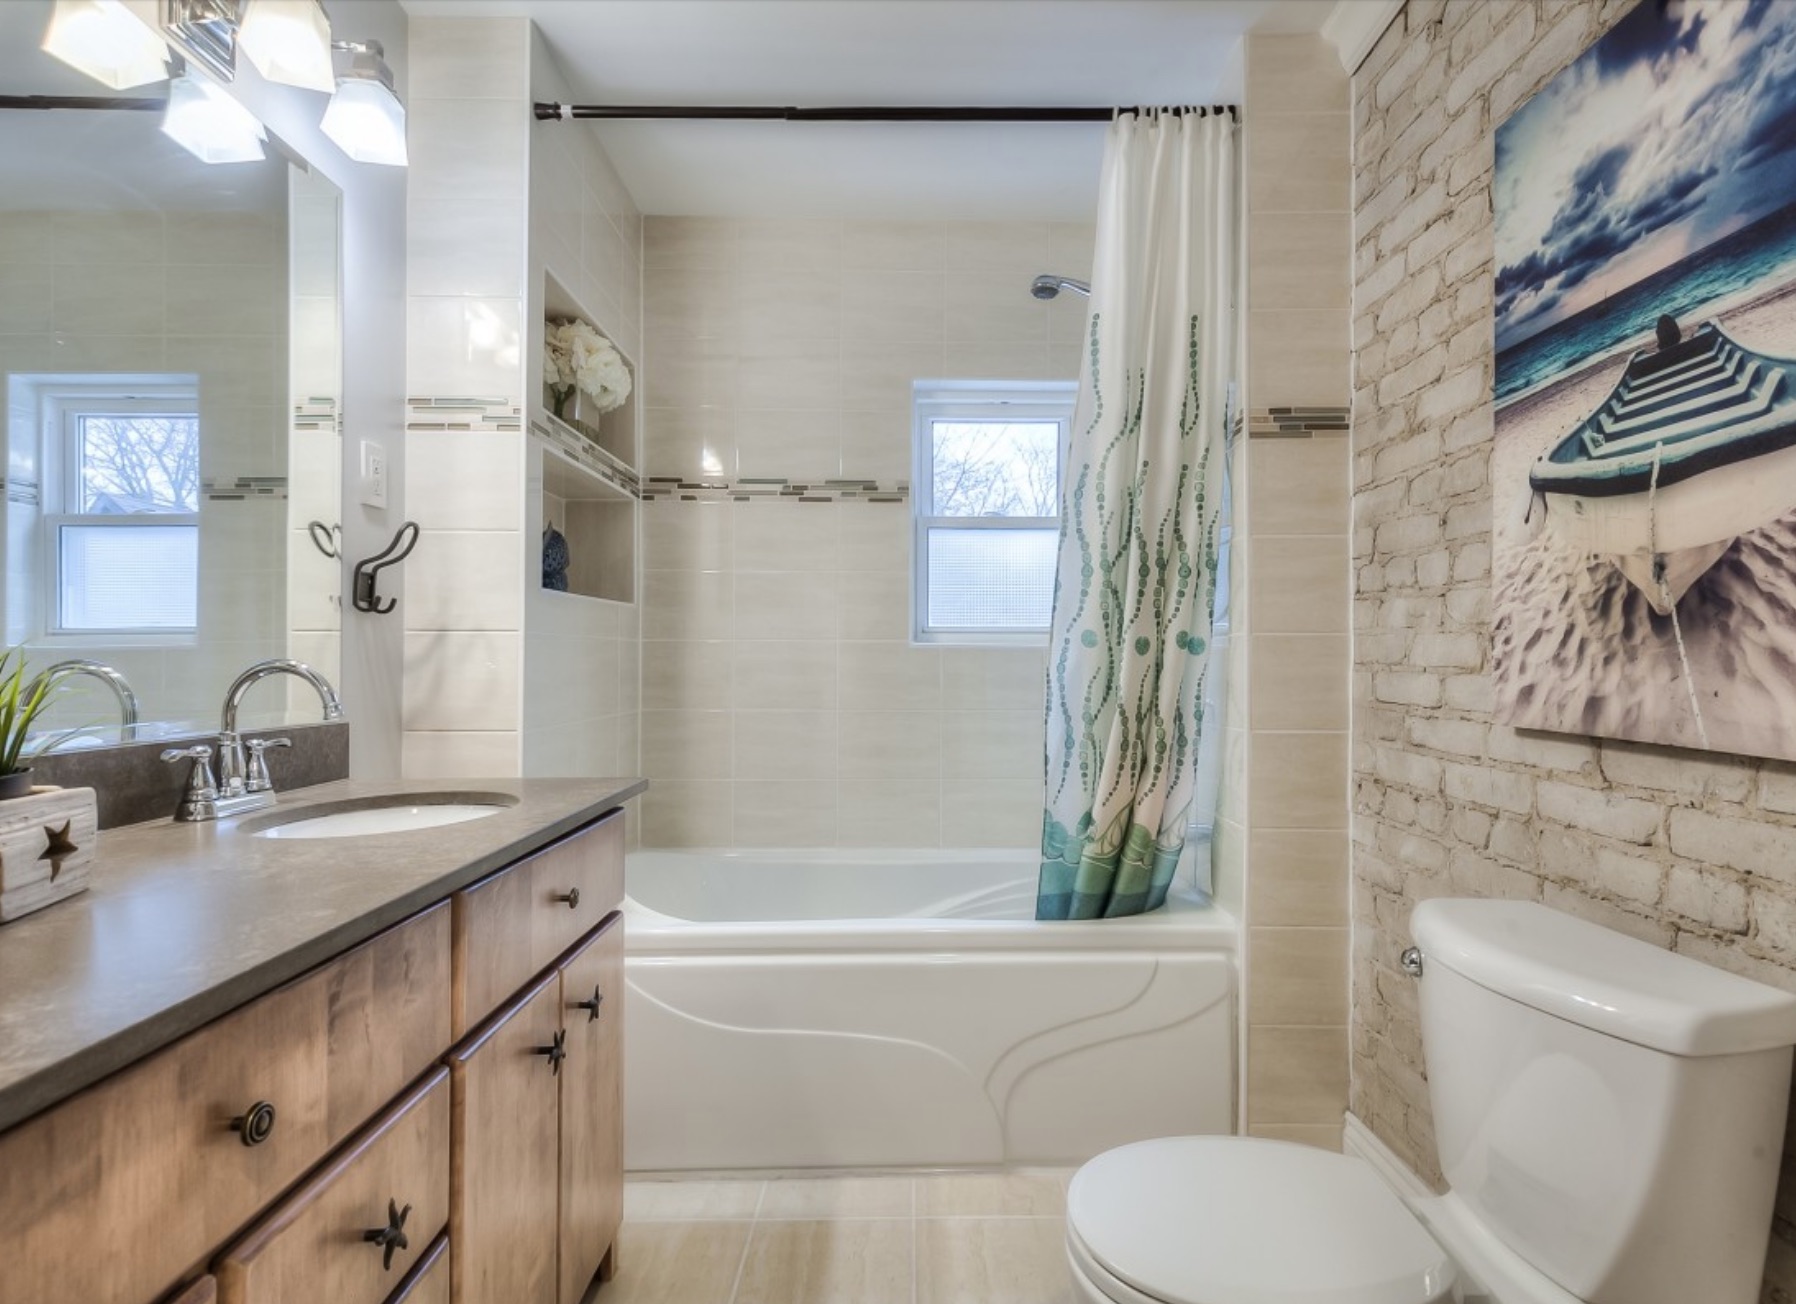 The only bathroom in the house is fully renovated with exposed brick and wood cabinet-style vanity